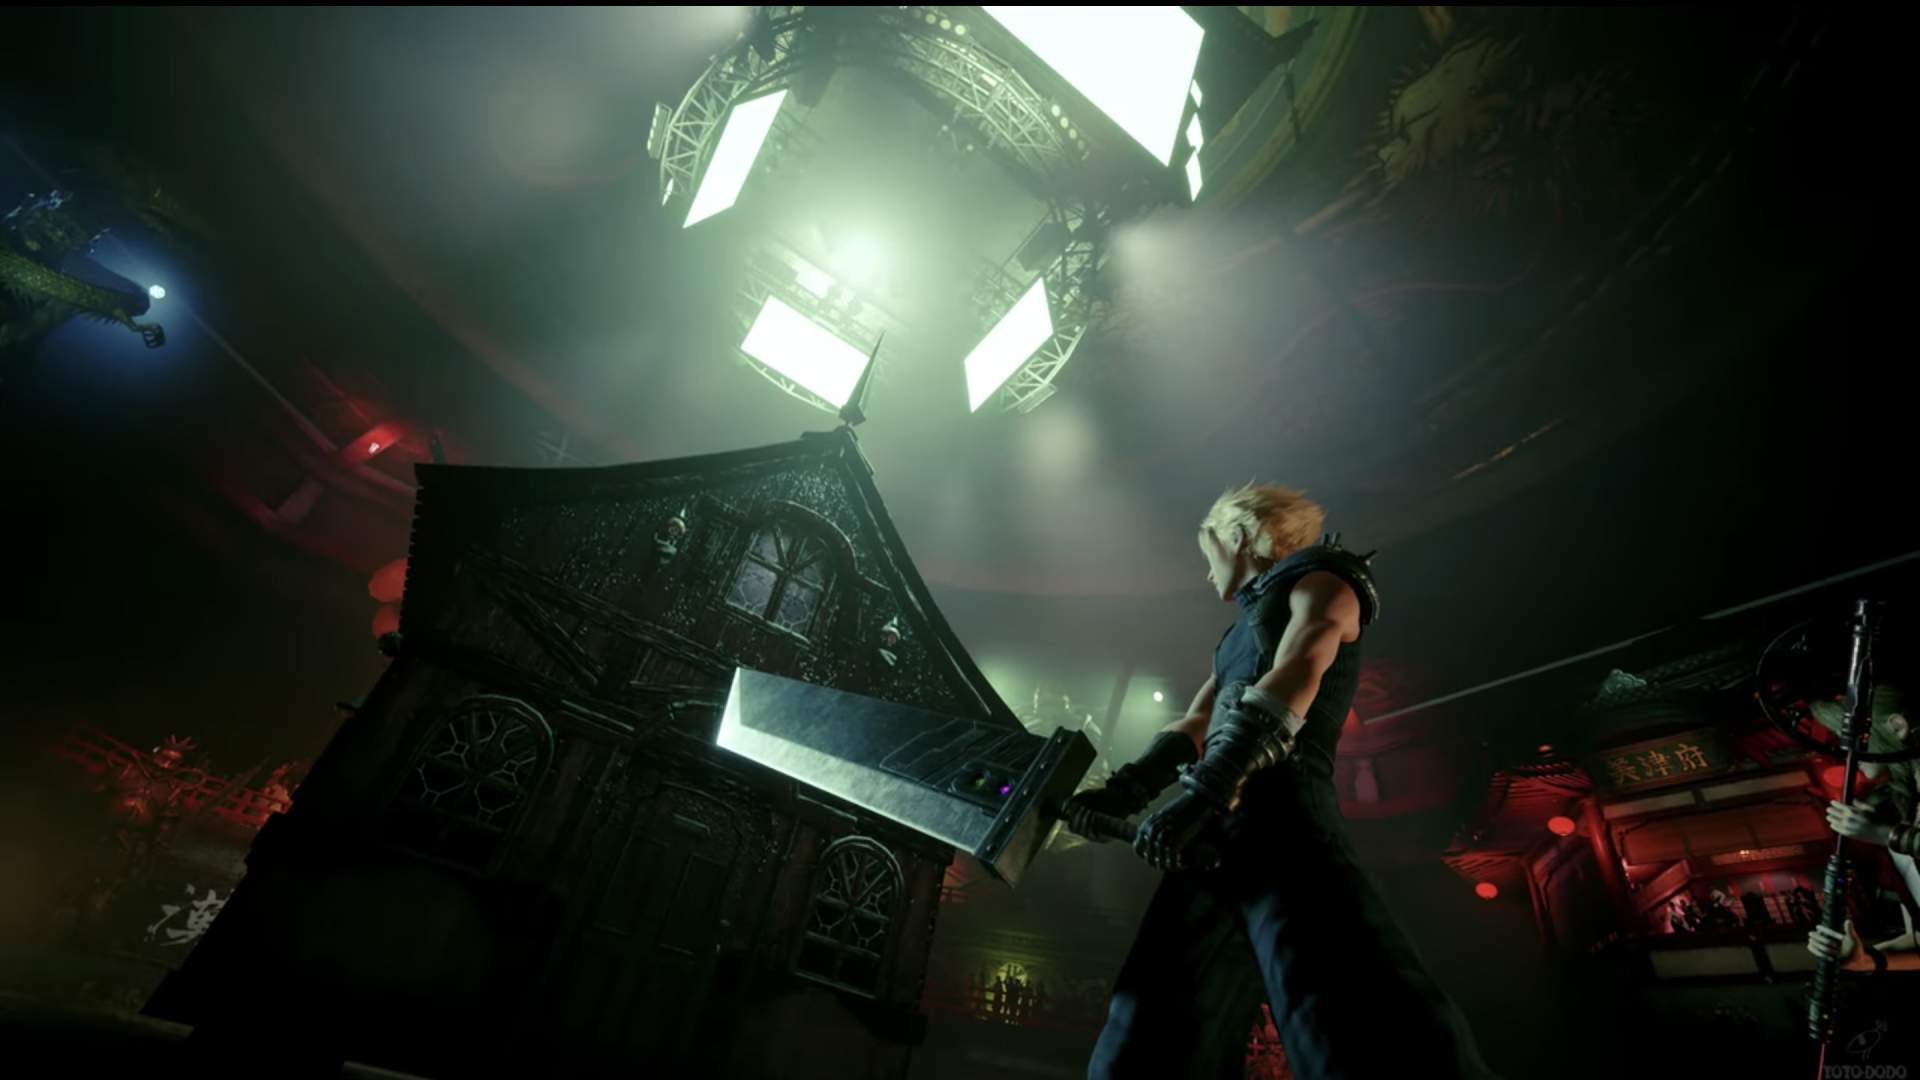 Hell House from FINAL FANTASY VII REMAKE